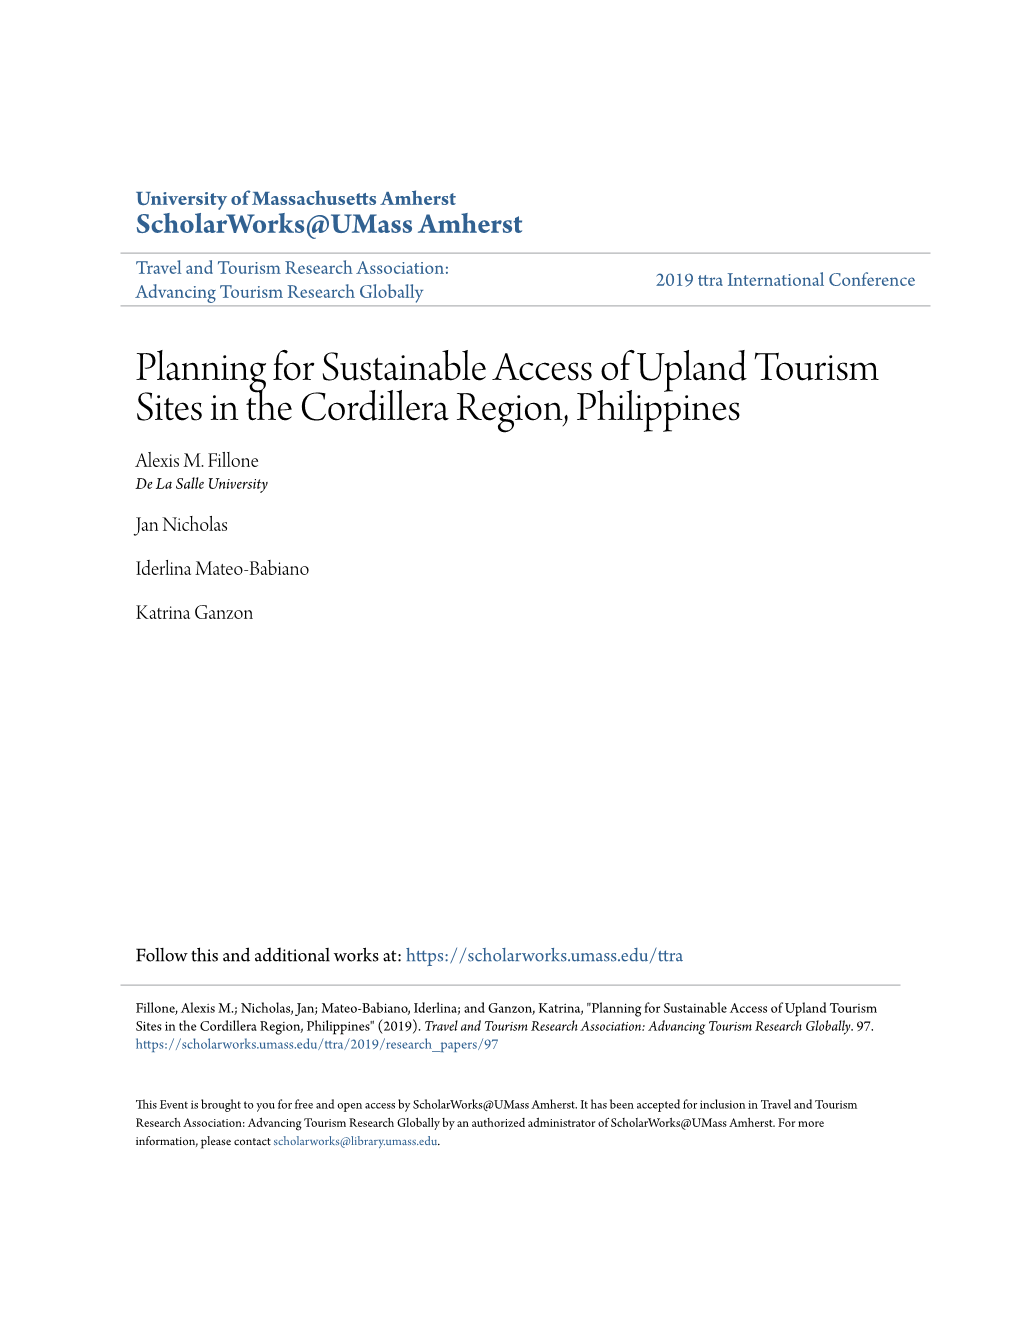 Planning for Sustainable Access of Upland Tourism Sites in the Cordillera Region, Philippines Alexis M